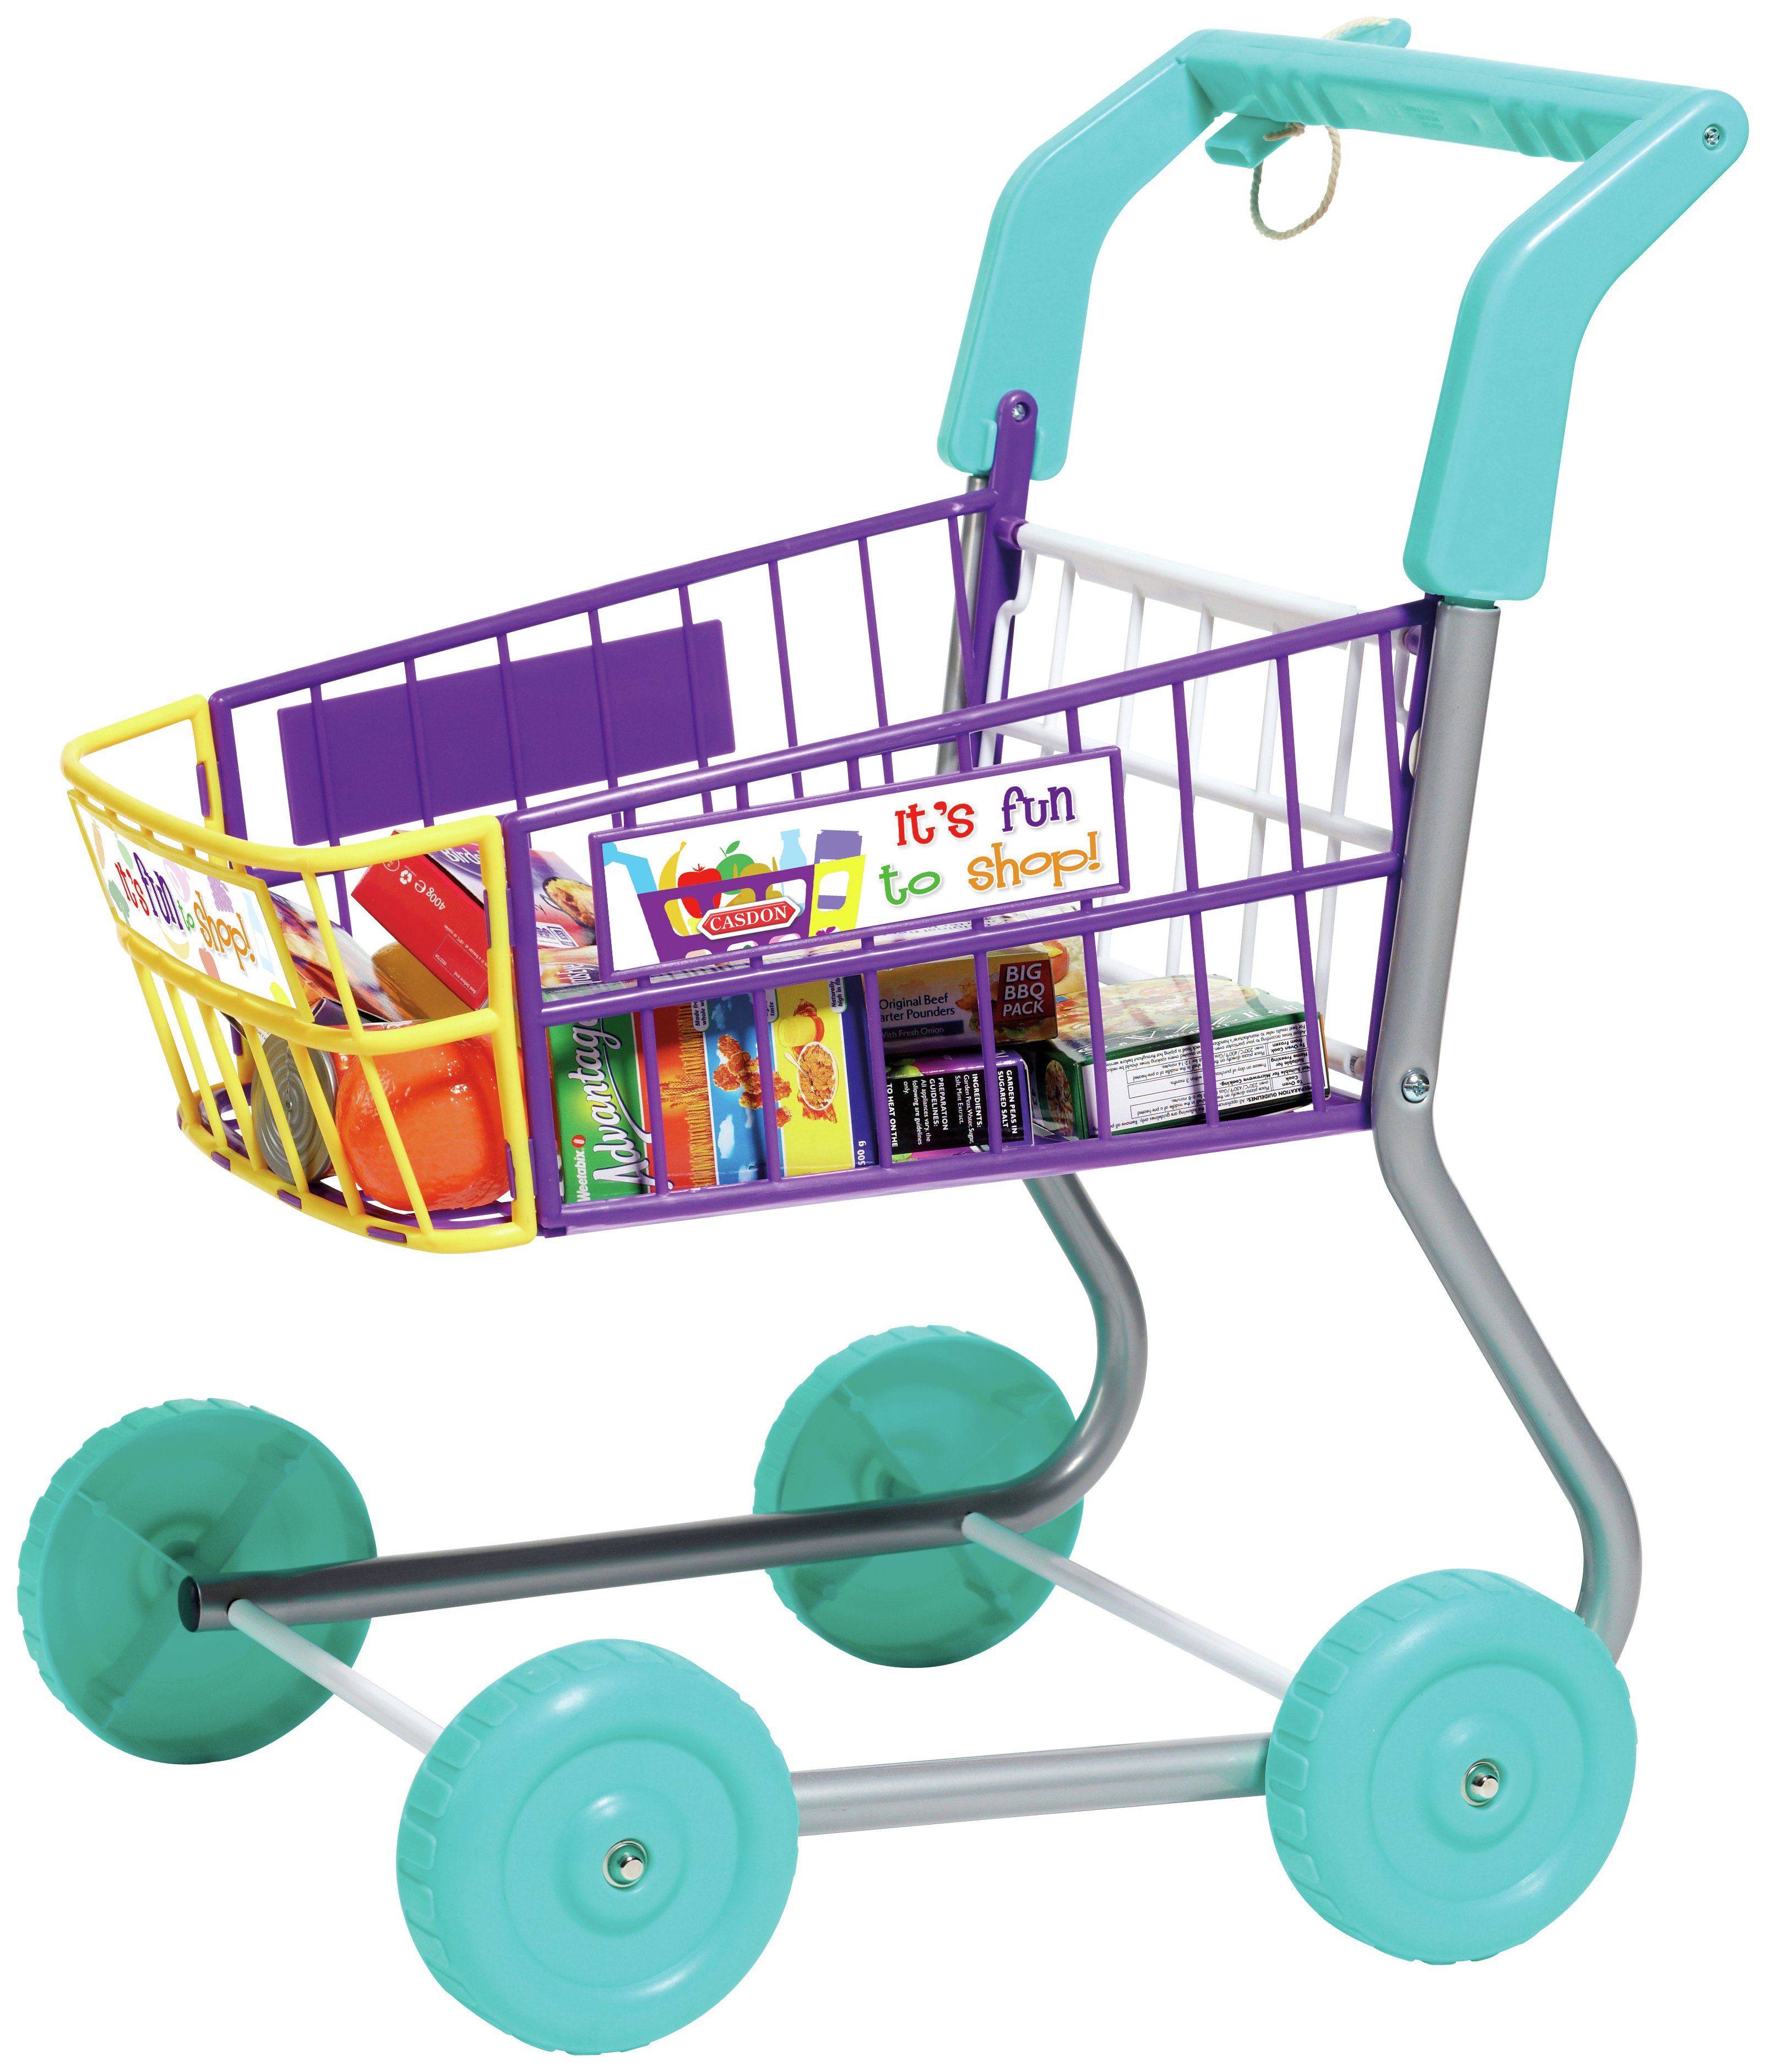 Role Play Child's Shopping Trolley. Review